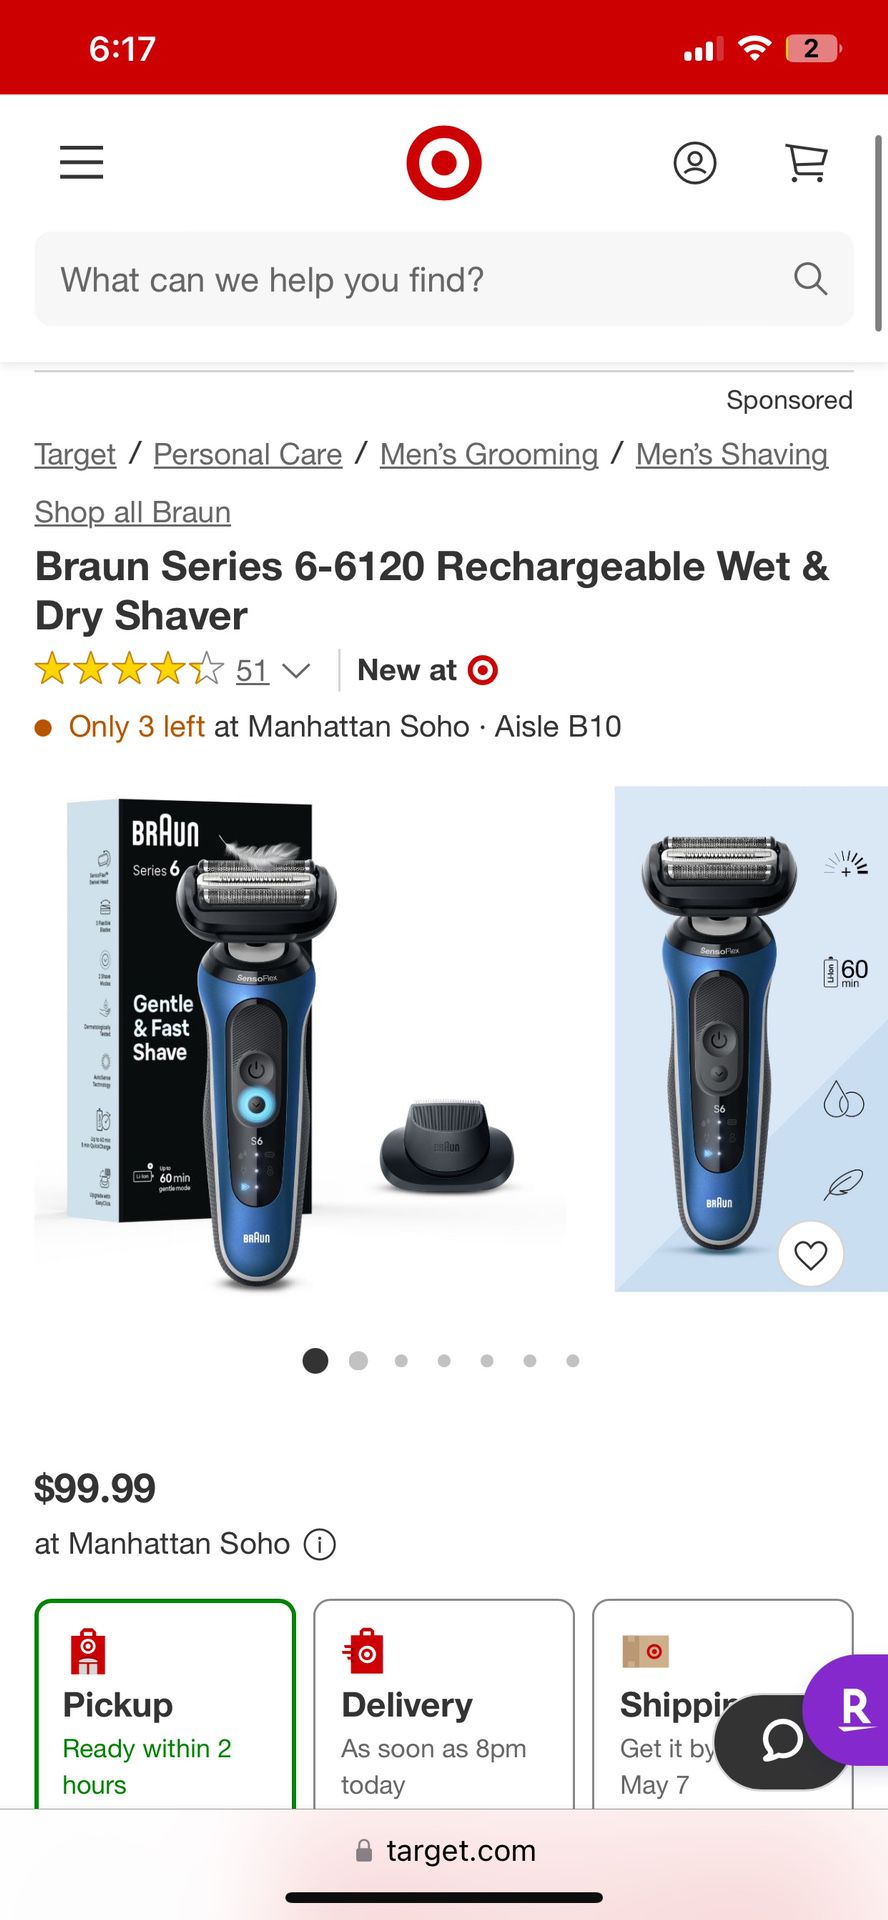 Braun Series 6-6120 Rechargeable Wet & Dry Shaver